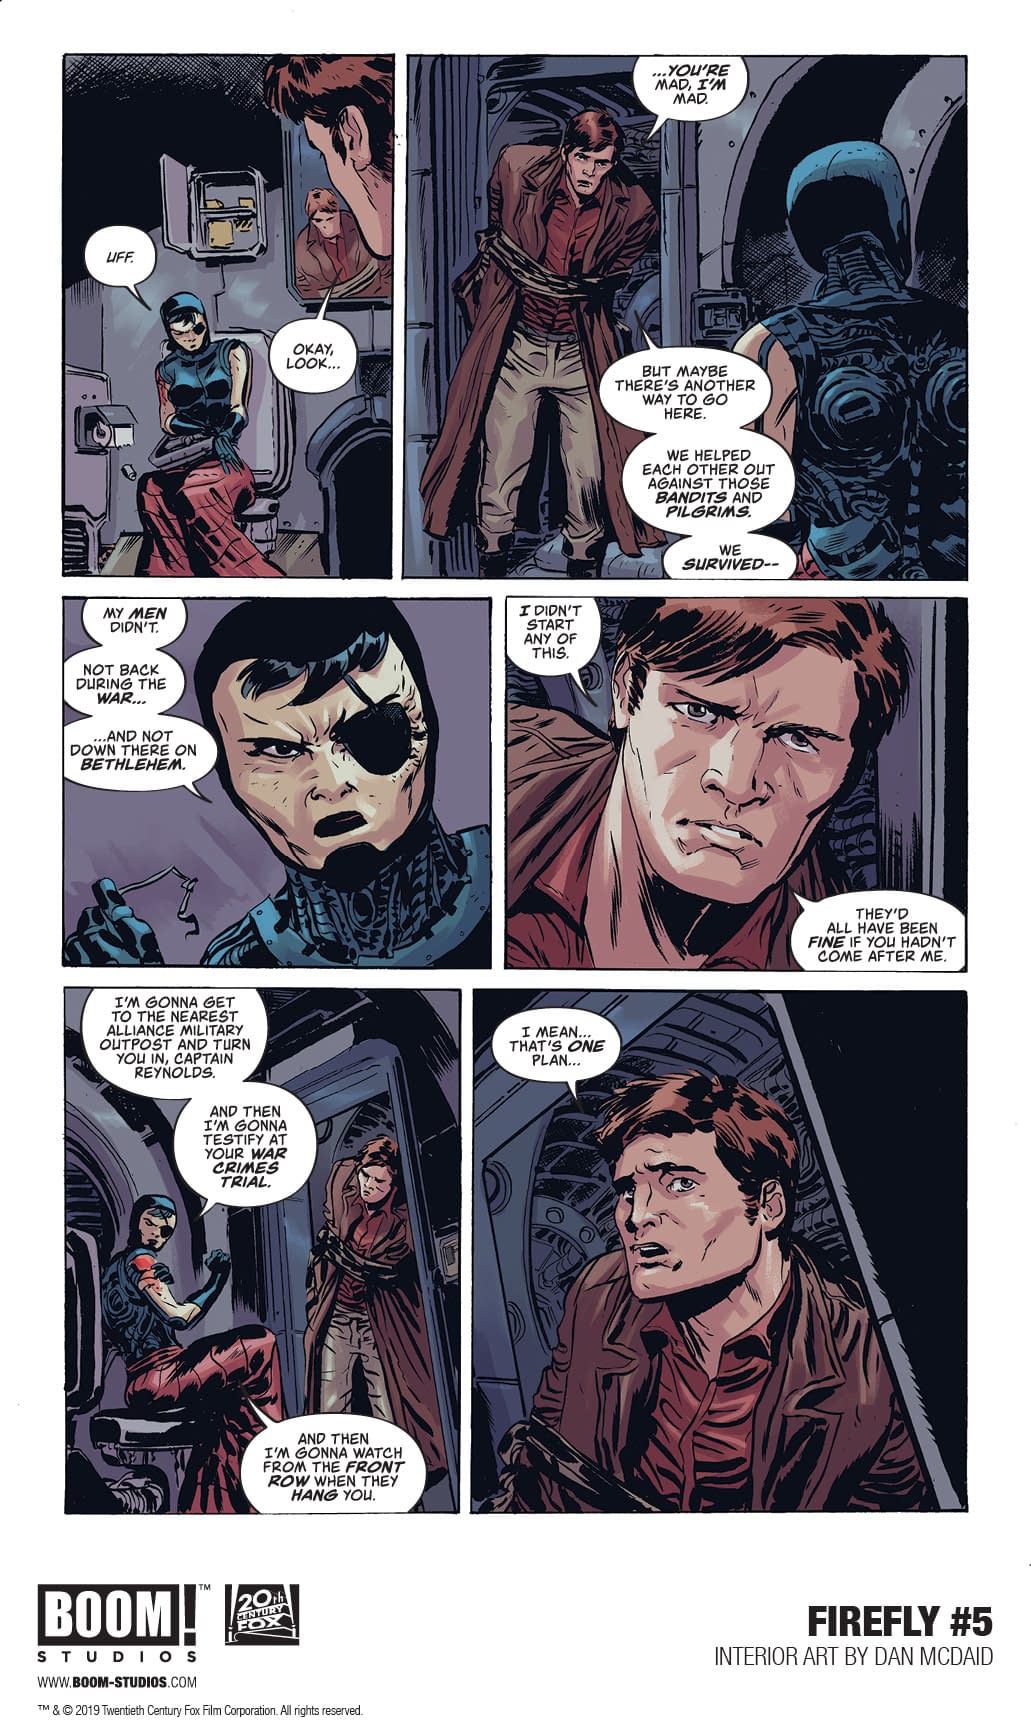 ATTN Firebronies: Get Your First Look at Firefly #5